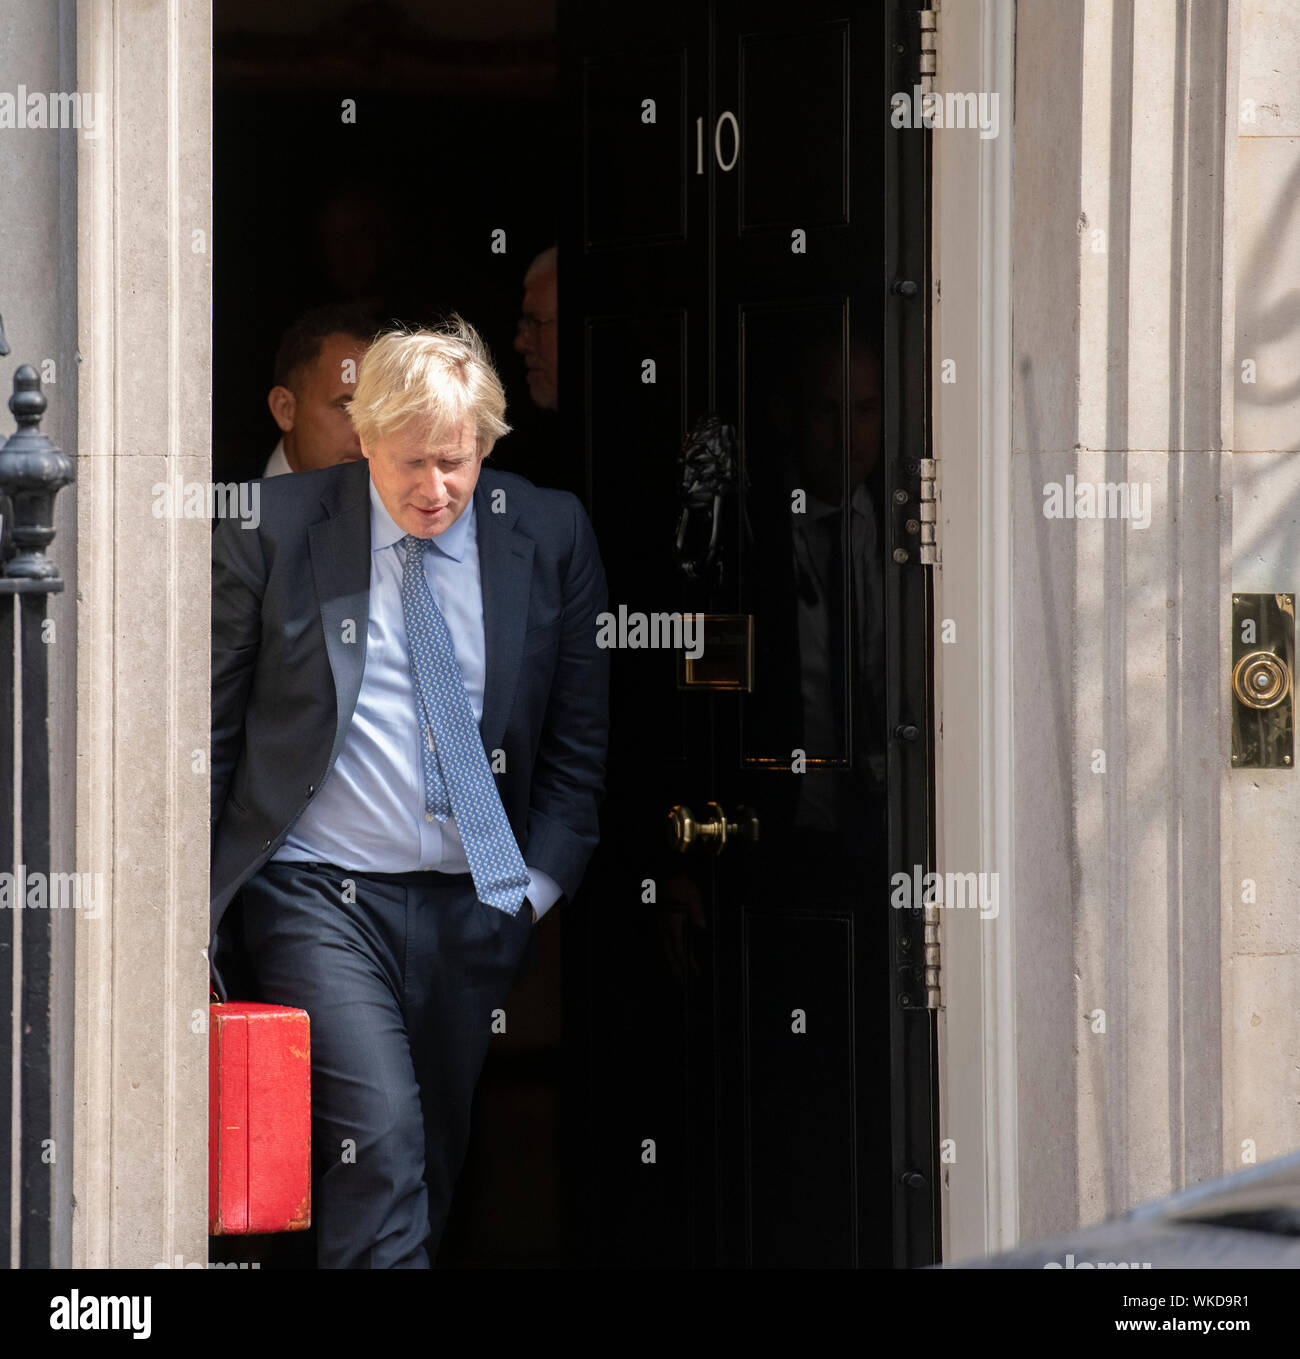 Downing Street, London, UK. 4th September 2019. PM Boris Johnson leaves No 10 to attend weekly Prime Ministers Questions in Parliament. Credit: Malcolm Park/Alamy Live News. Stock Photo